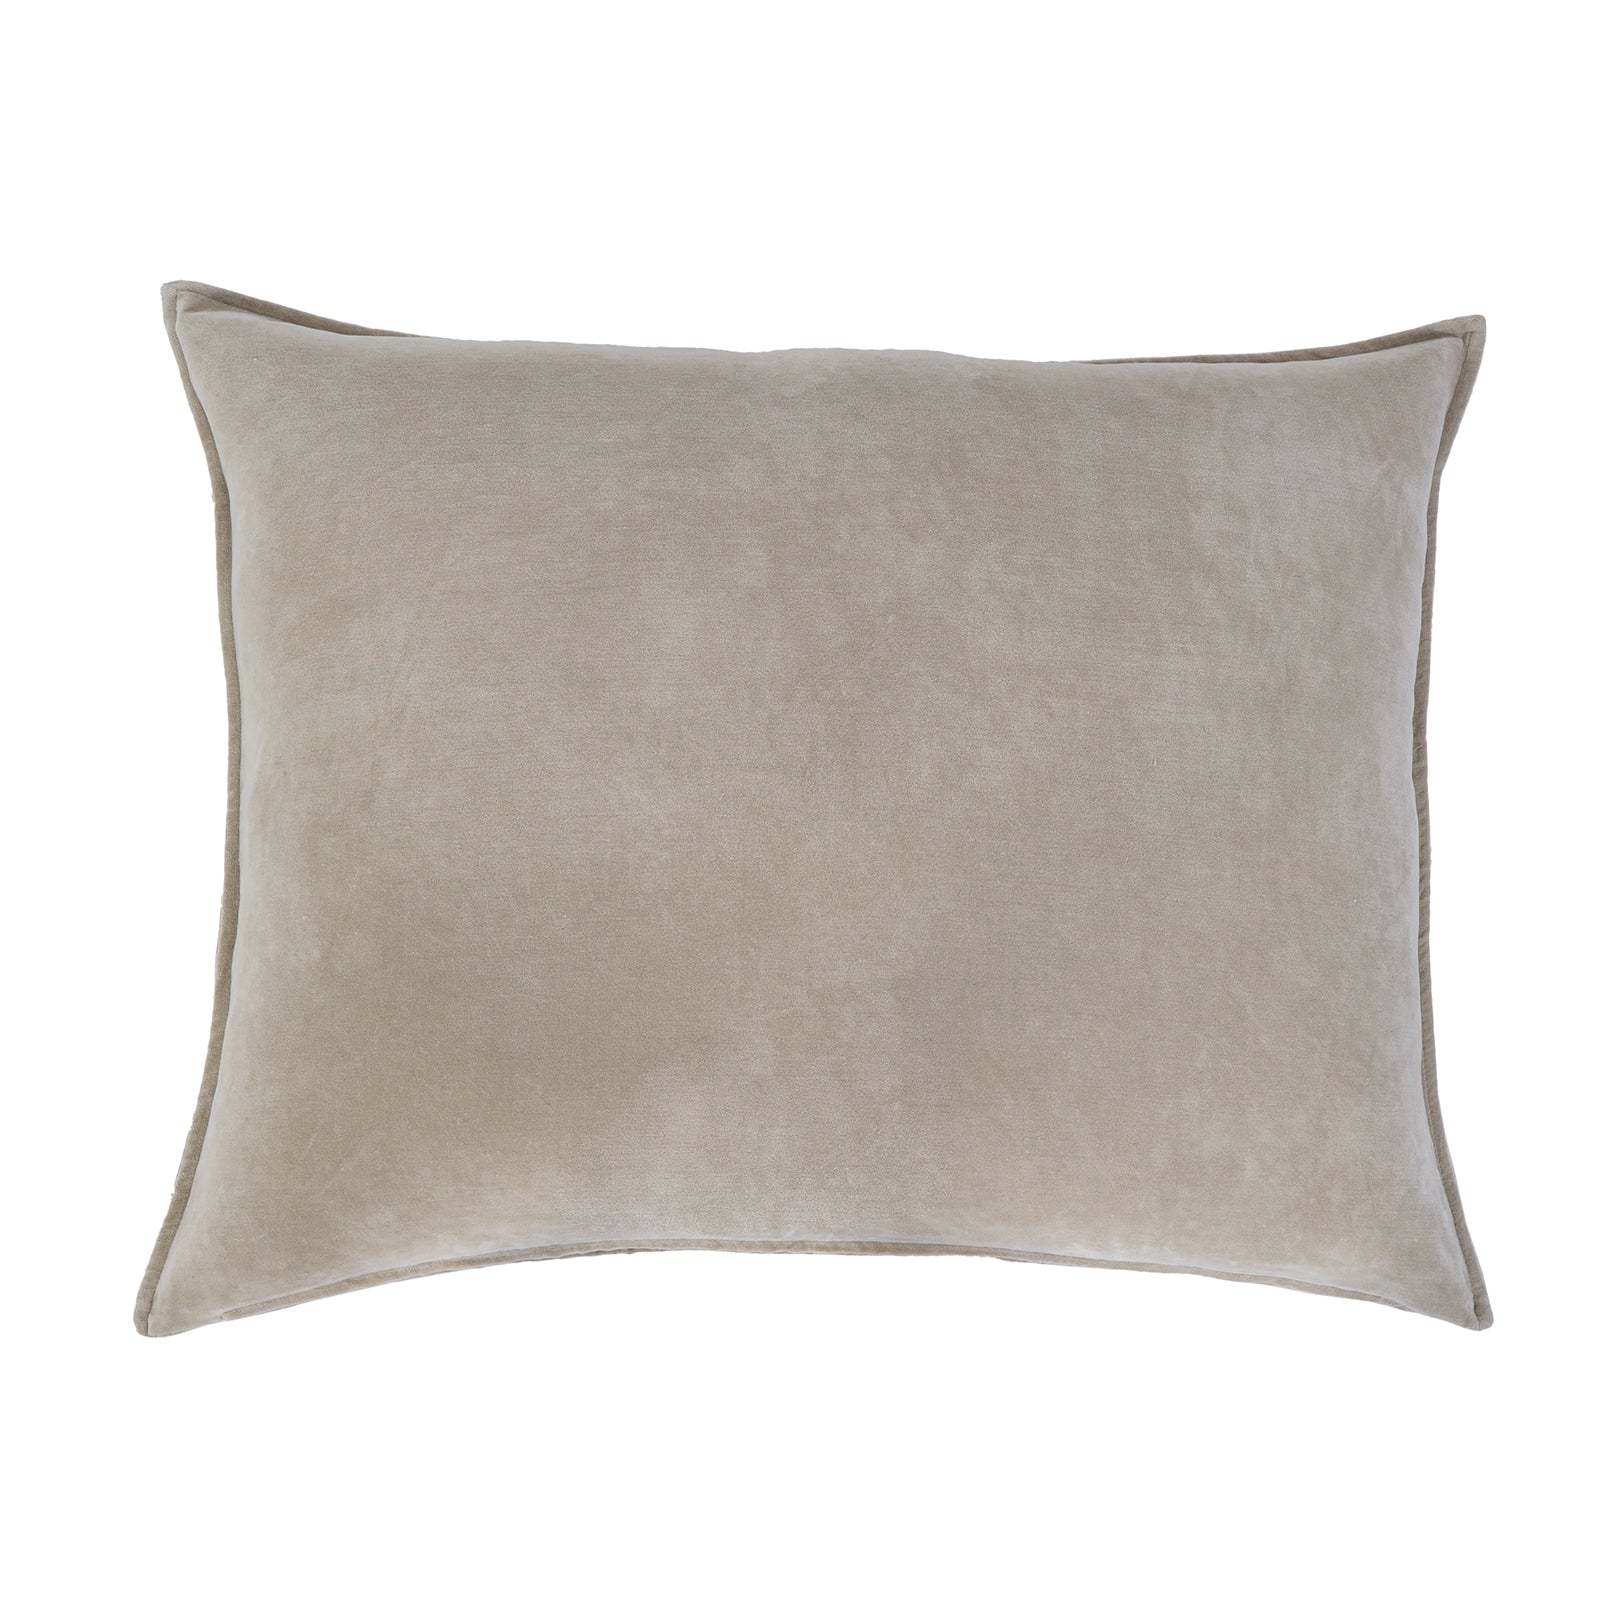 Bianca BIG PILLOW 28&quot; X 36&quot; WITH INSERT -Natural color - Pom pom At Home